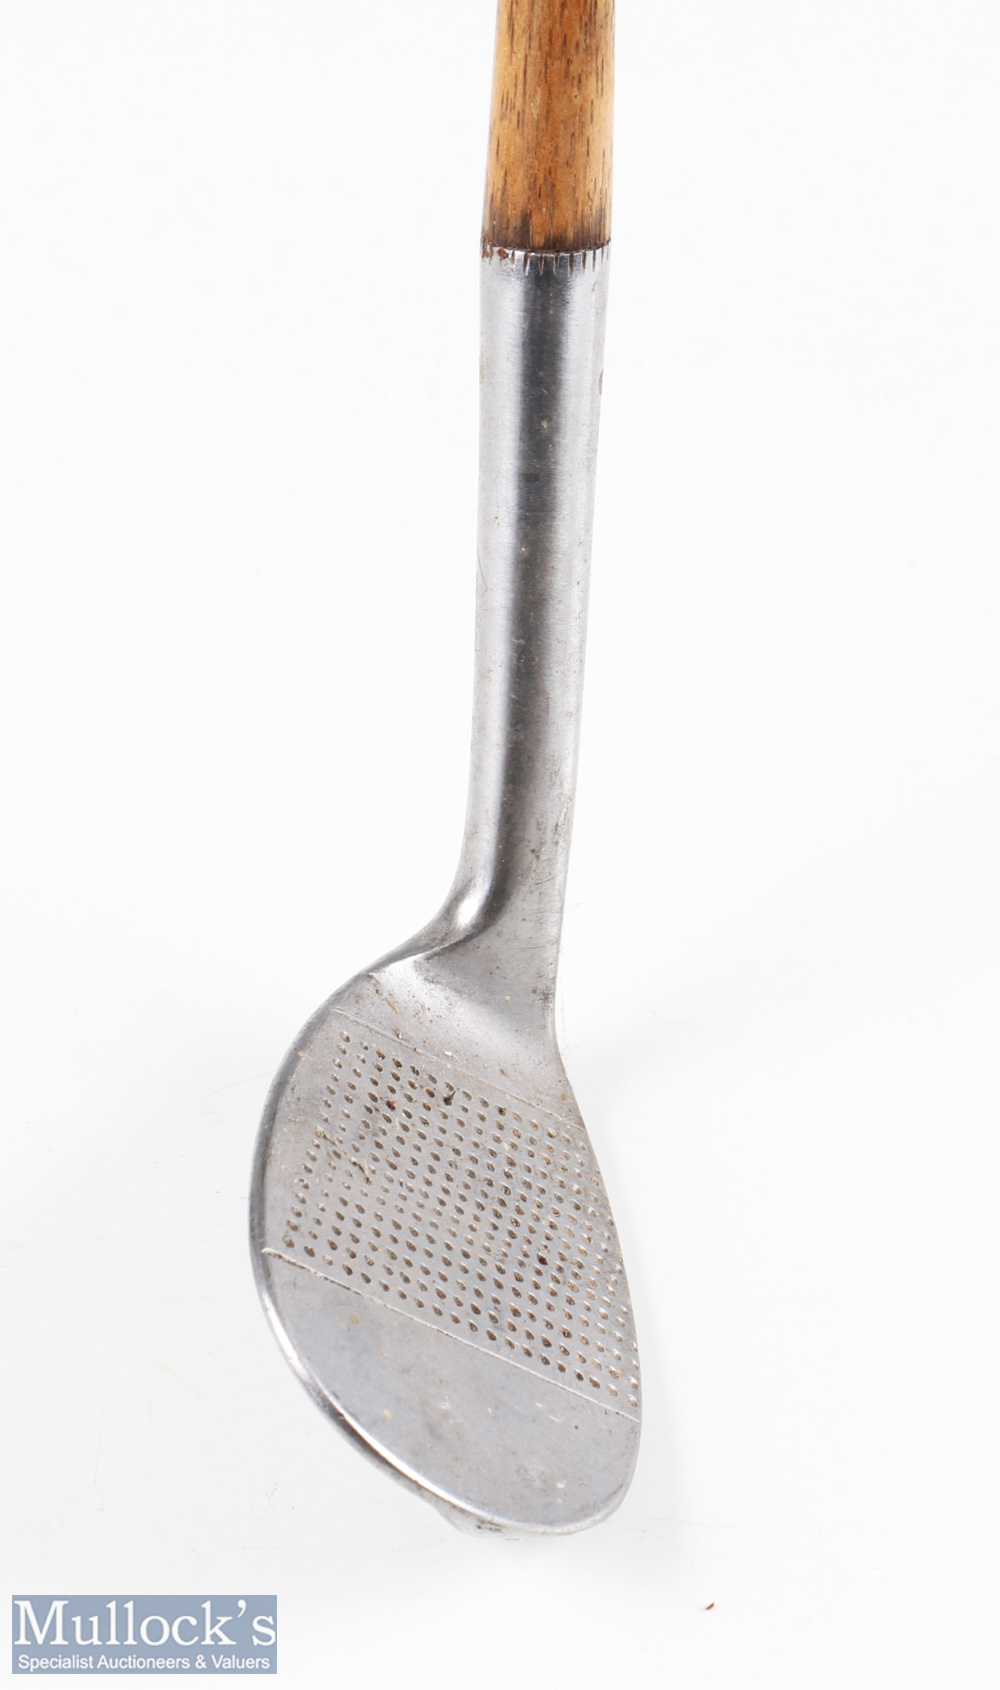 Nicoll Leven "The Howitzer" Noshok wide flanged sole sand wedge - stamped A J Griffin the head and - Image 2 of 3